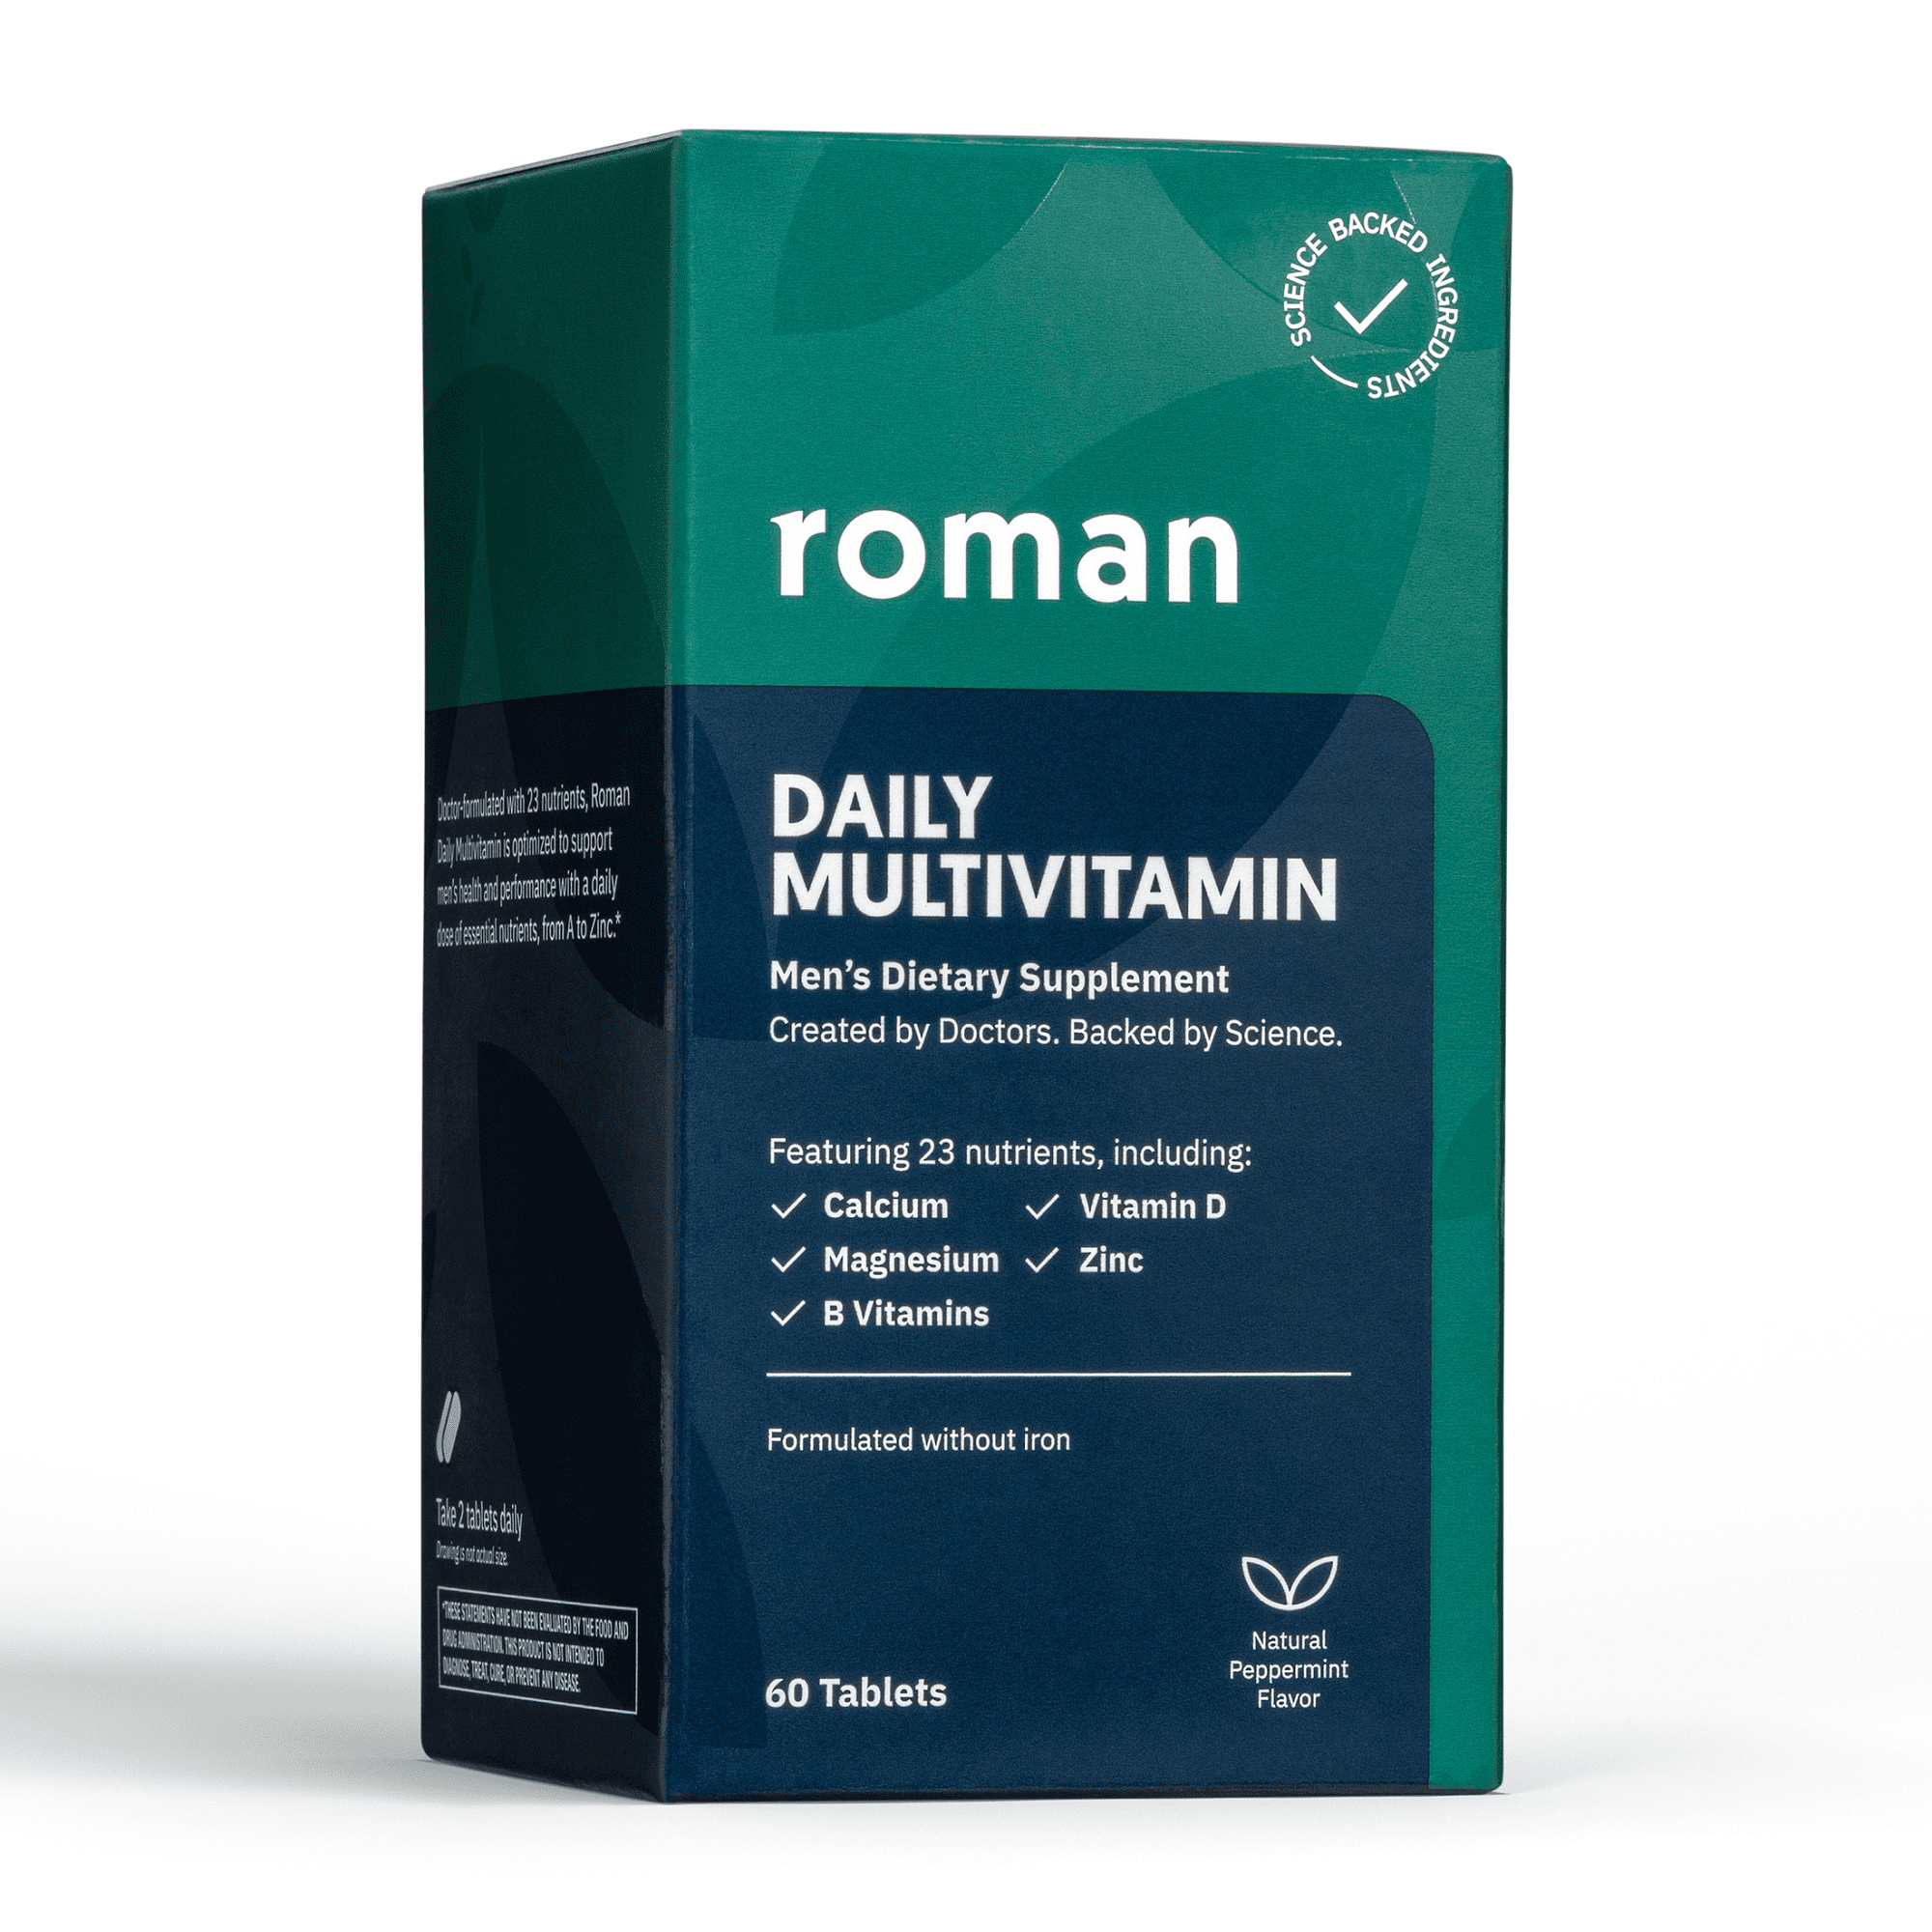 Roman Daily Multivitamin Supplement for Men with 23 Nutrients, 60 Tablets